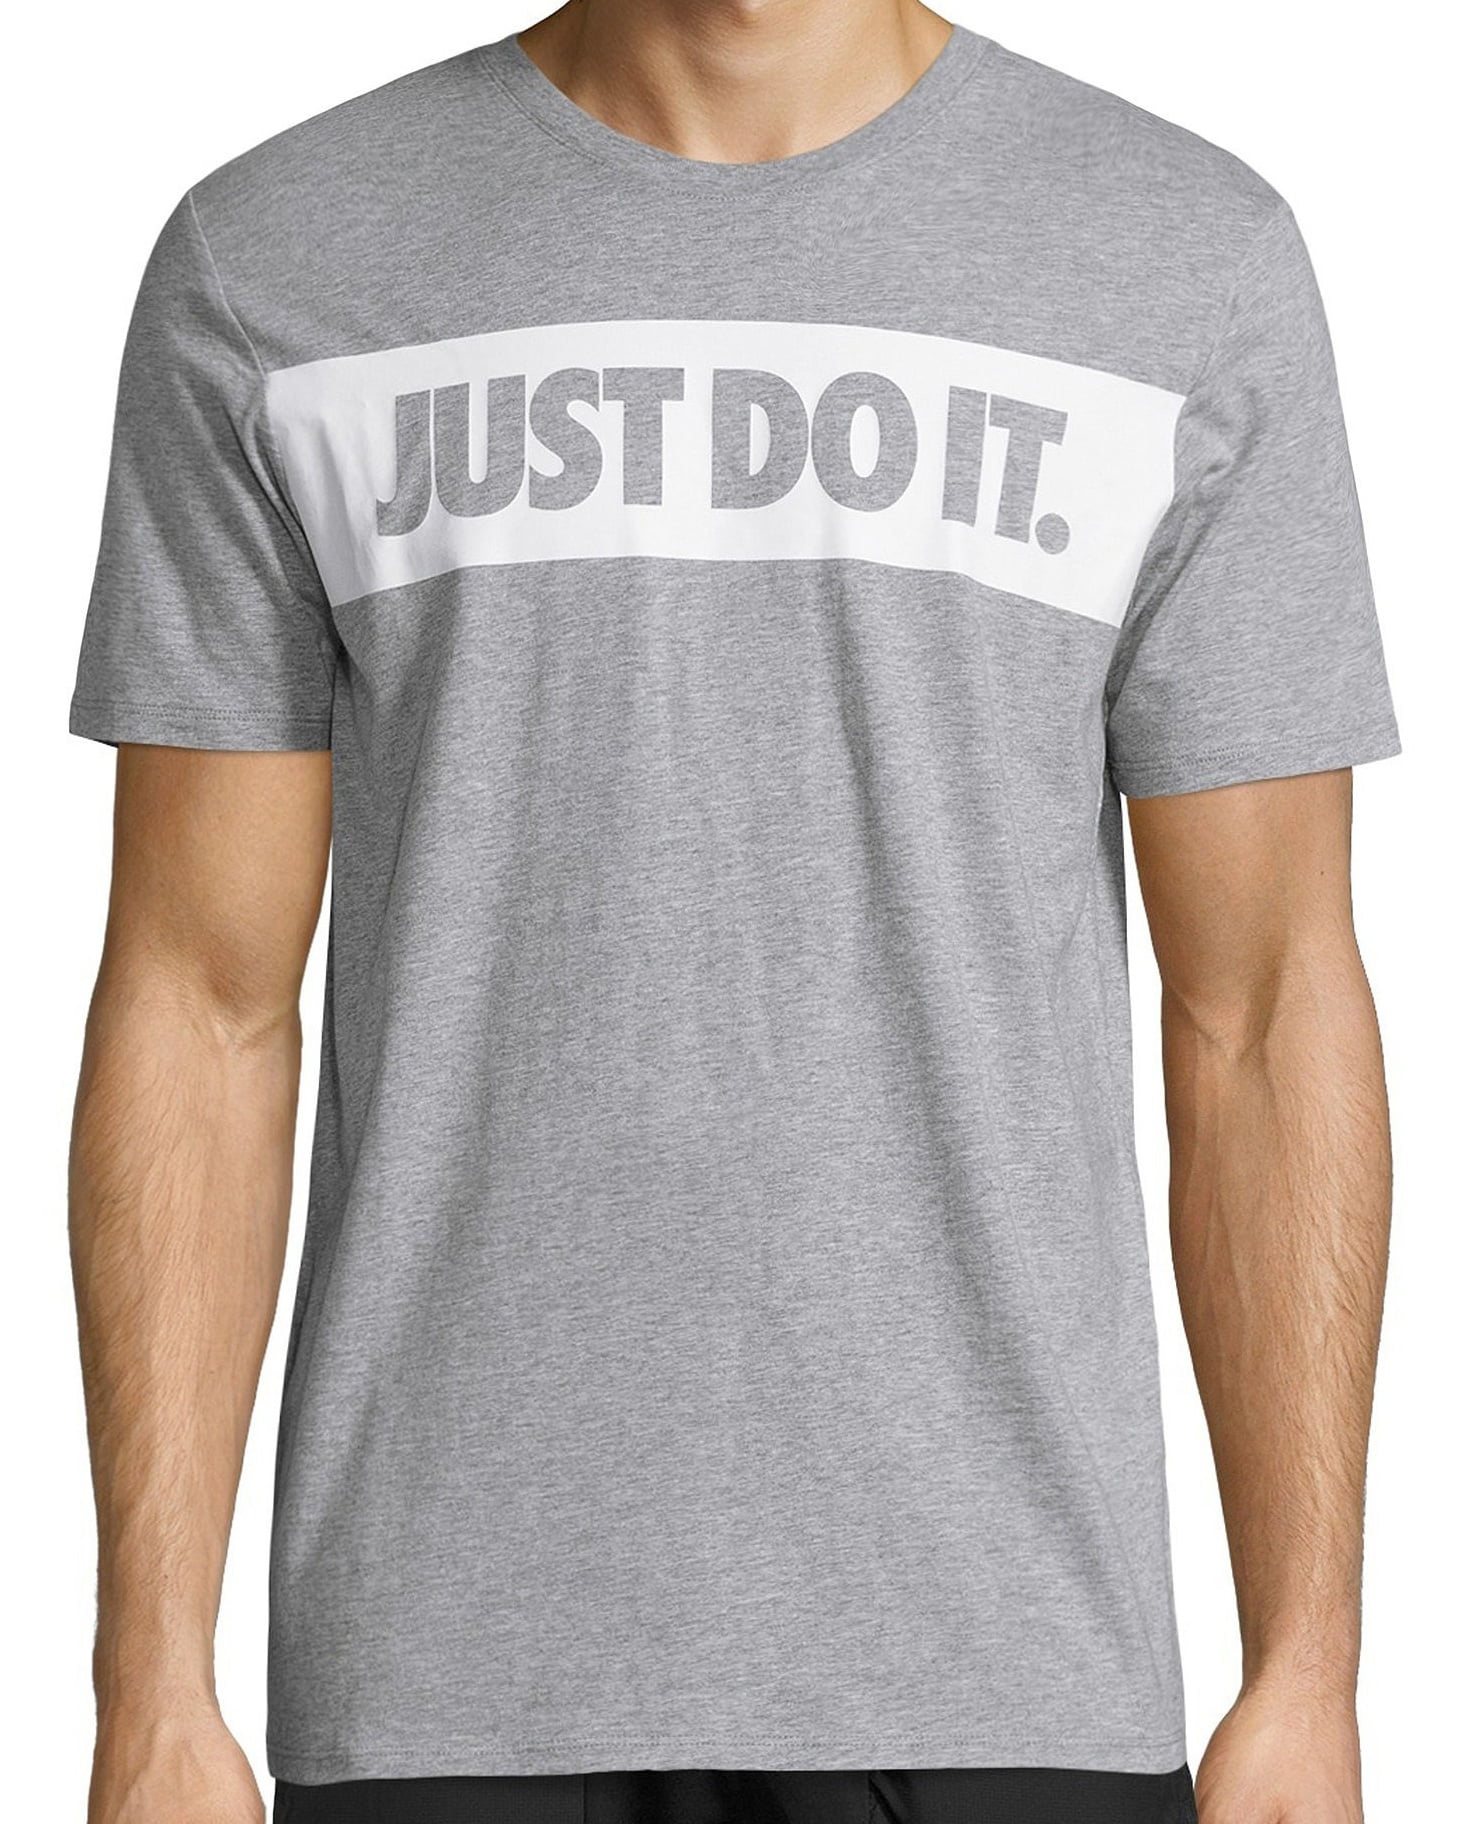 Nike - Nike NEW Gray Mens Size Small S Just Do It Slogan Graphic Tee T ...